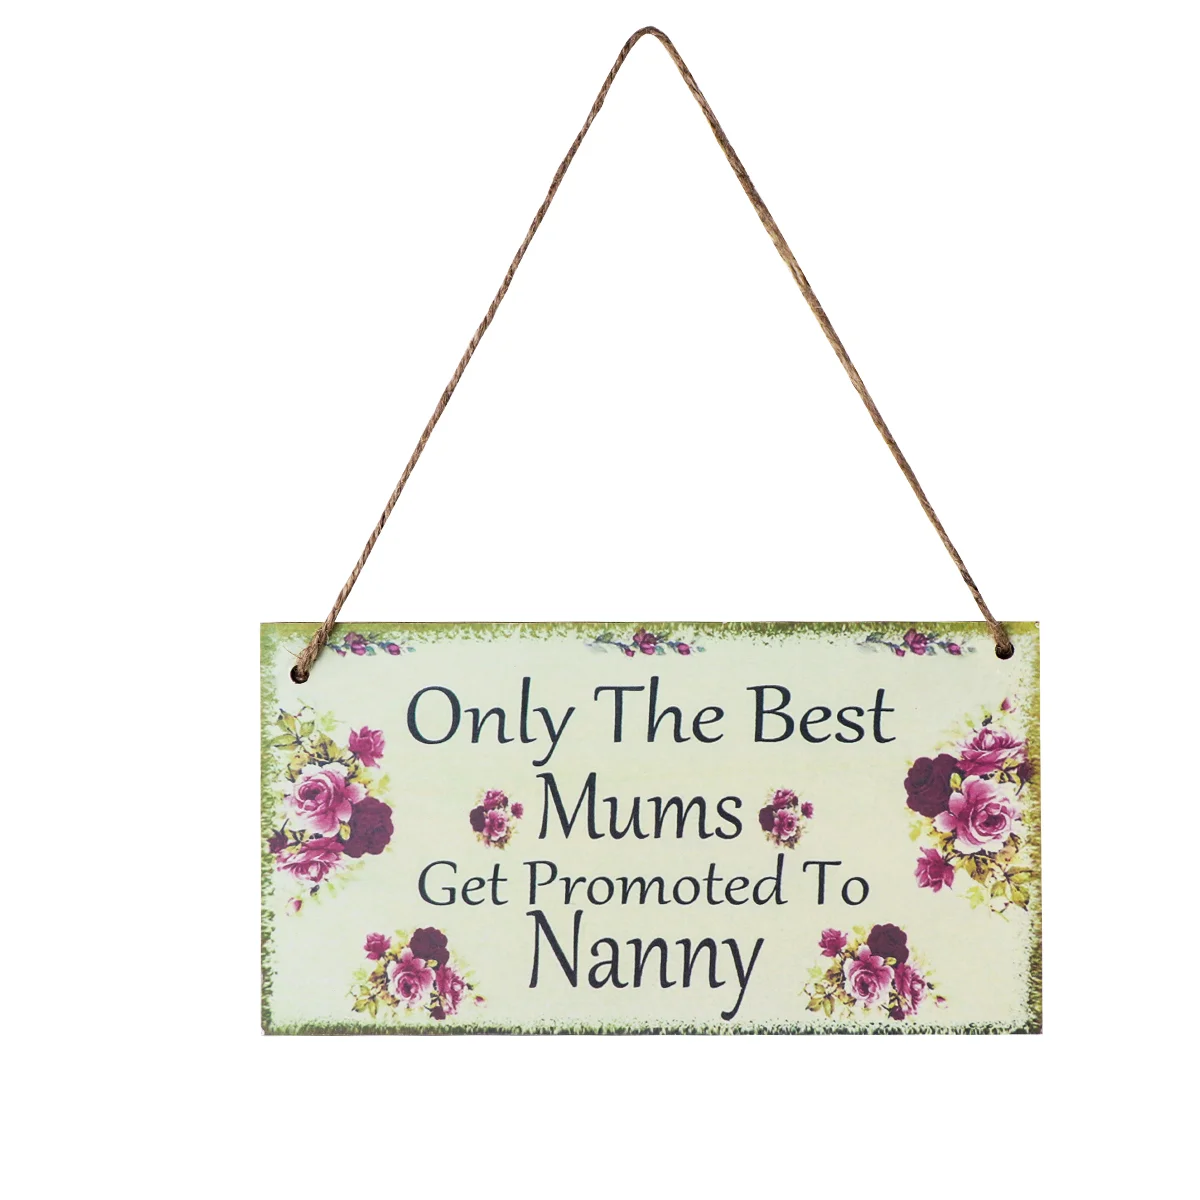 

Mum Nanny Hanging Board, 1PC Creative Lovely Wooden Wall Plaque Sign for Birthday Thanksgiving Mothers Day|20. 5 x 11 x 0. 5cm